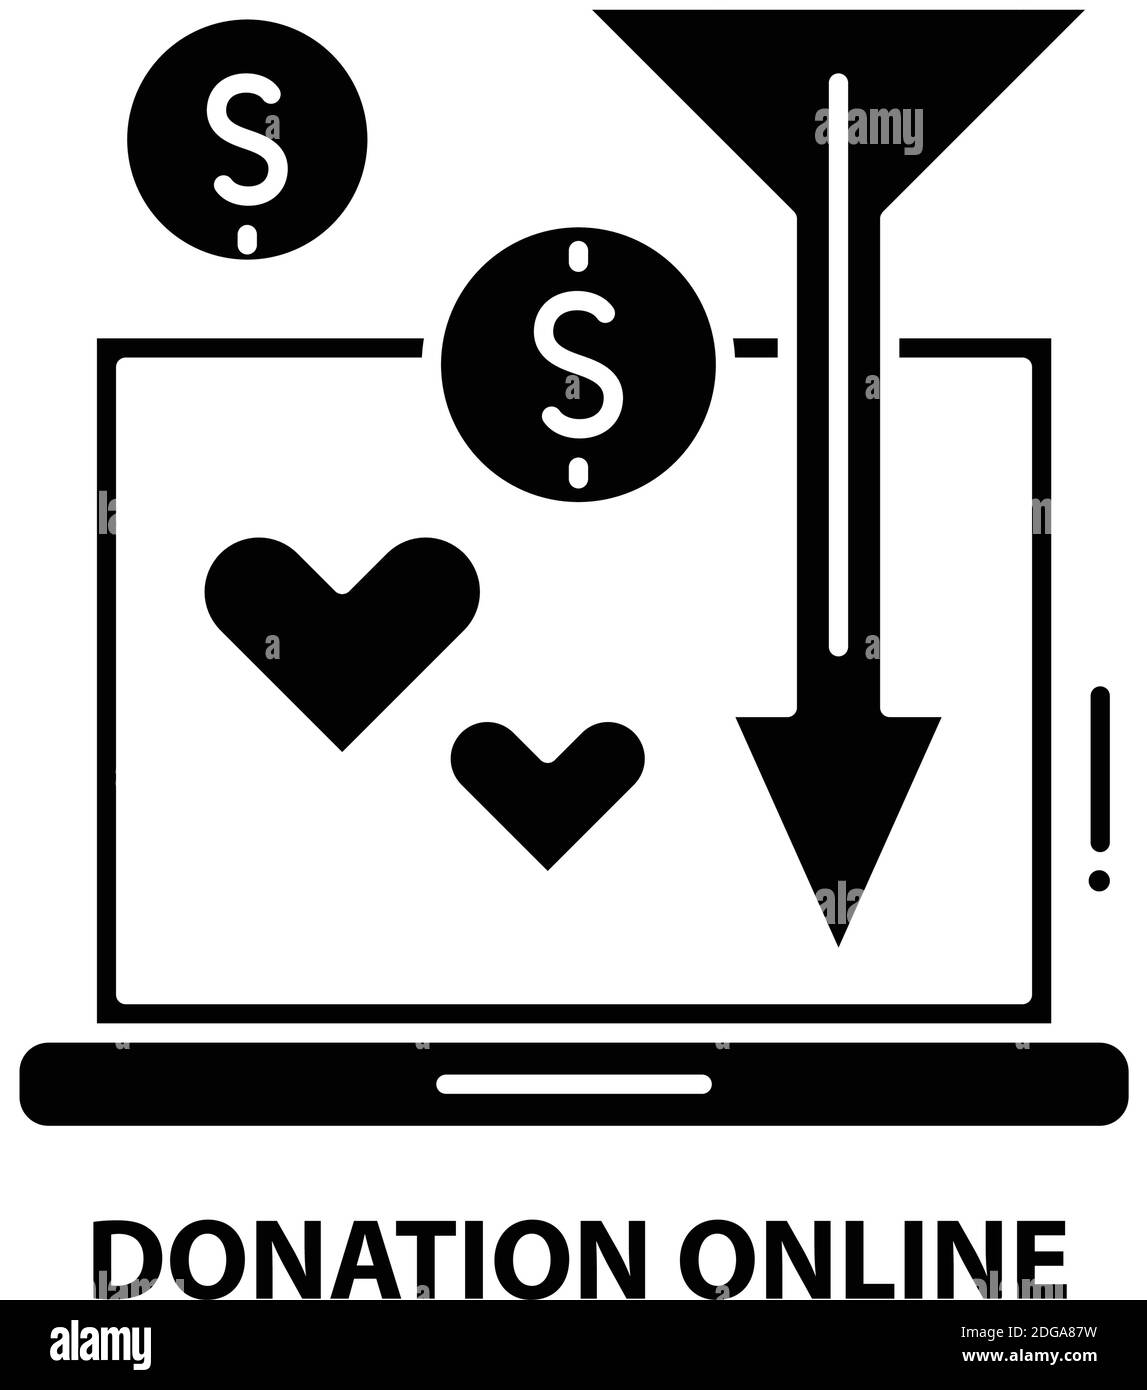 donation online icon, black vector sign with editable strokes, concept illustration Stock Vector